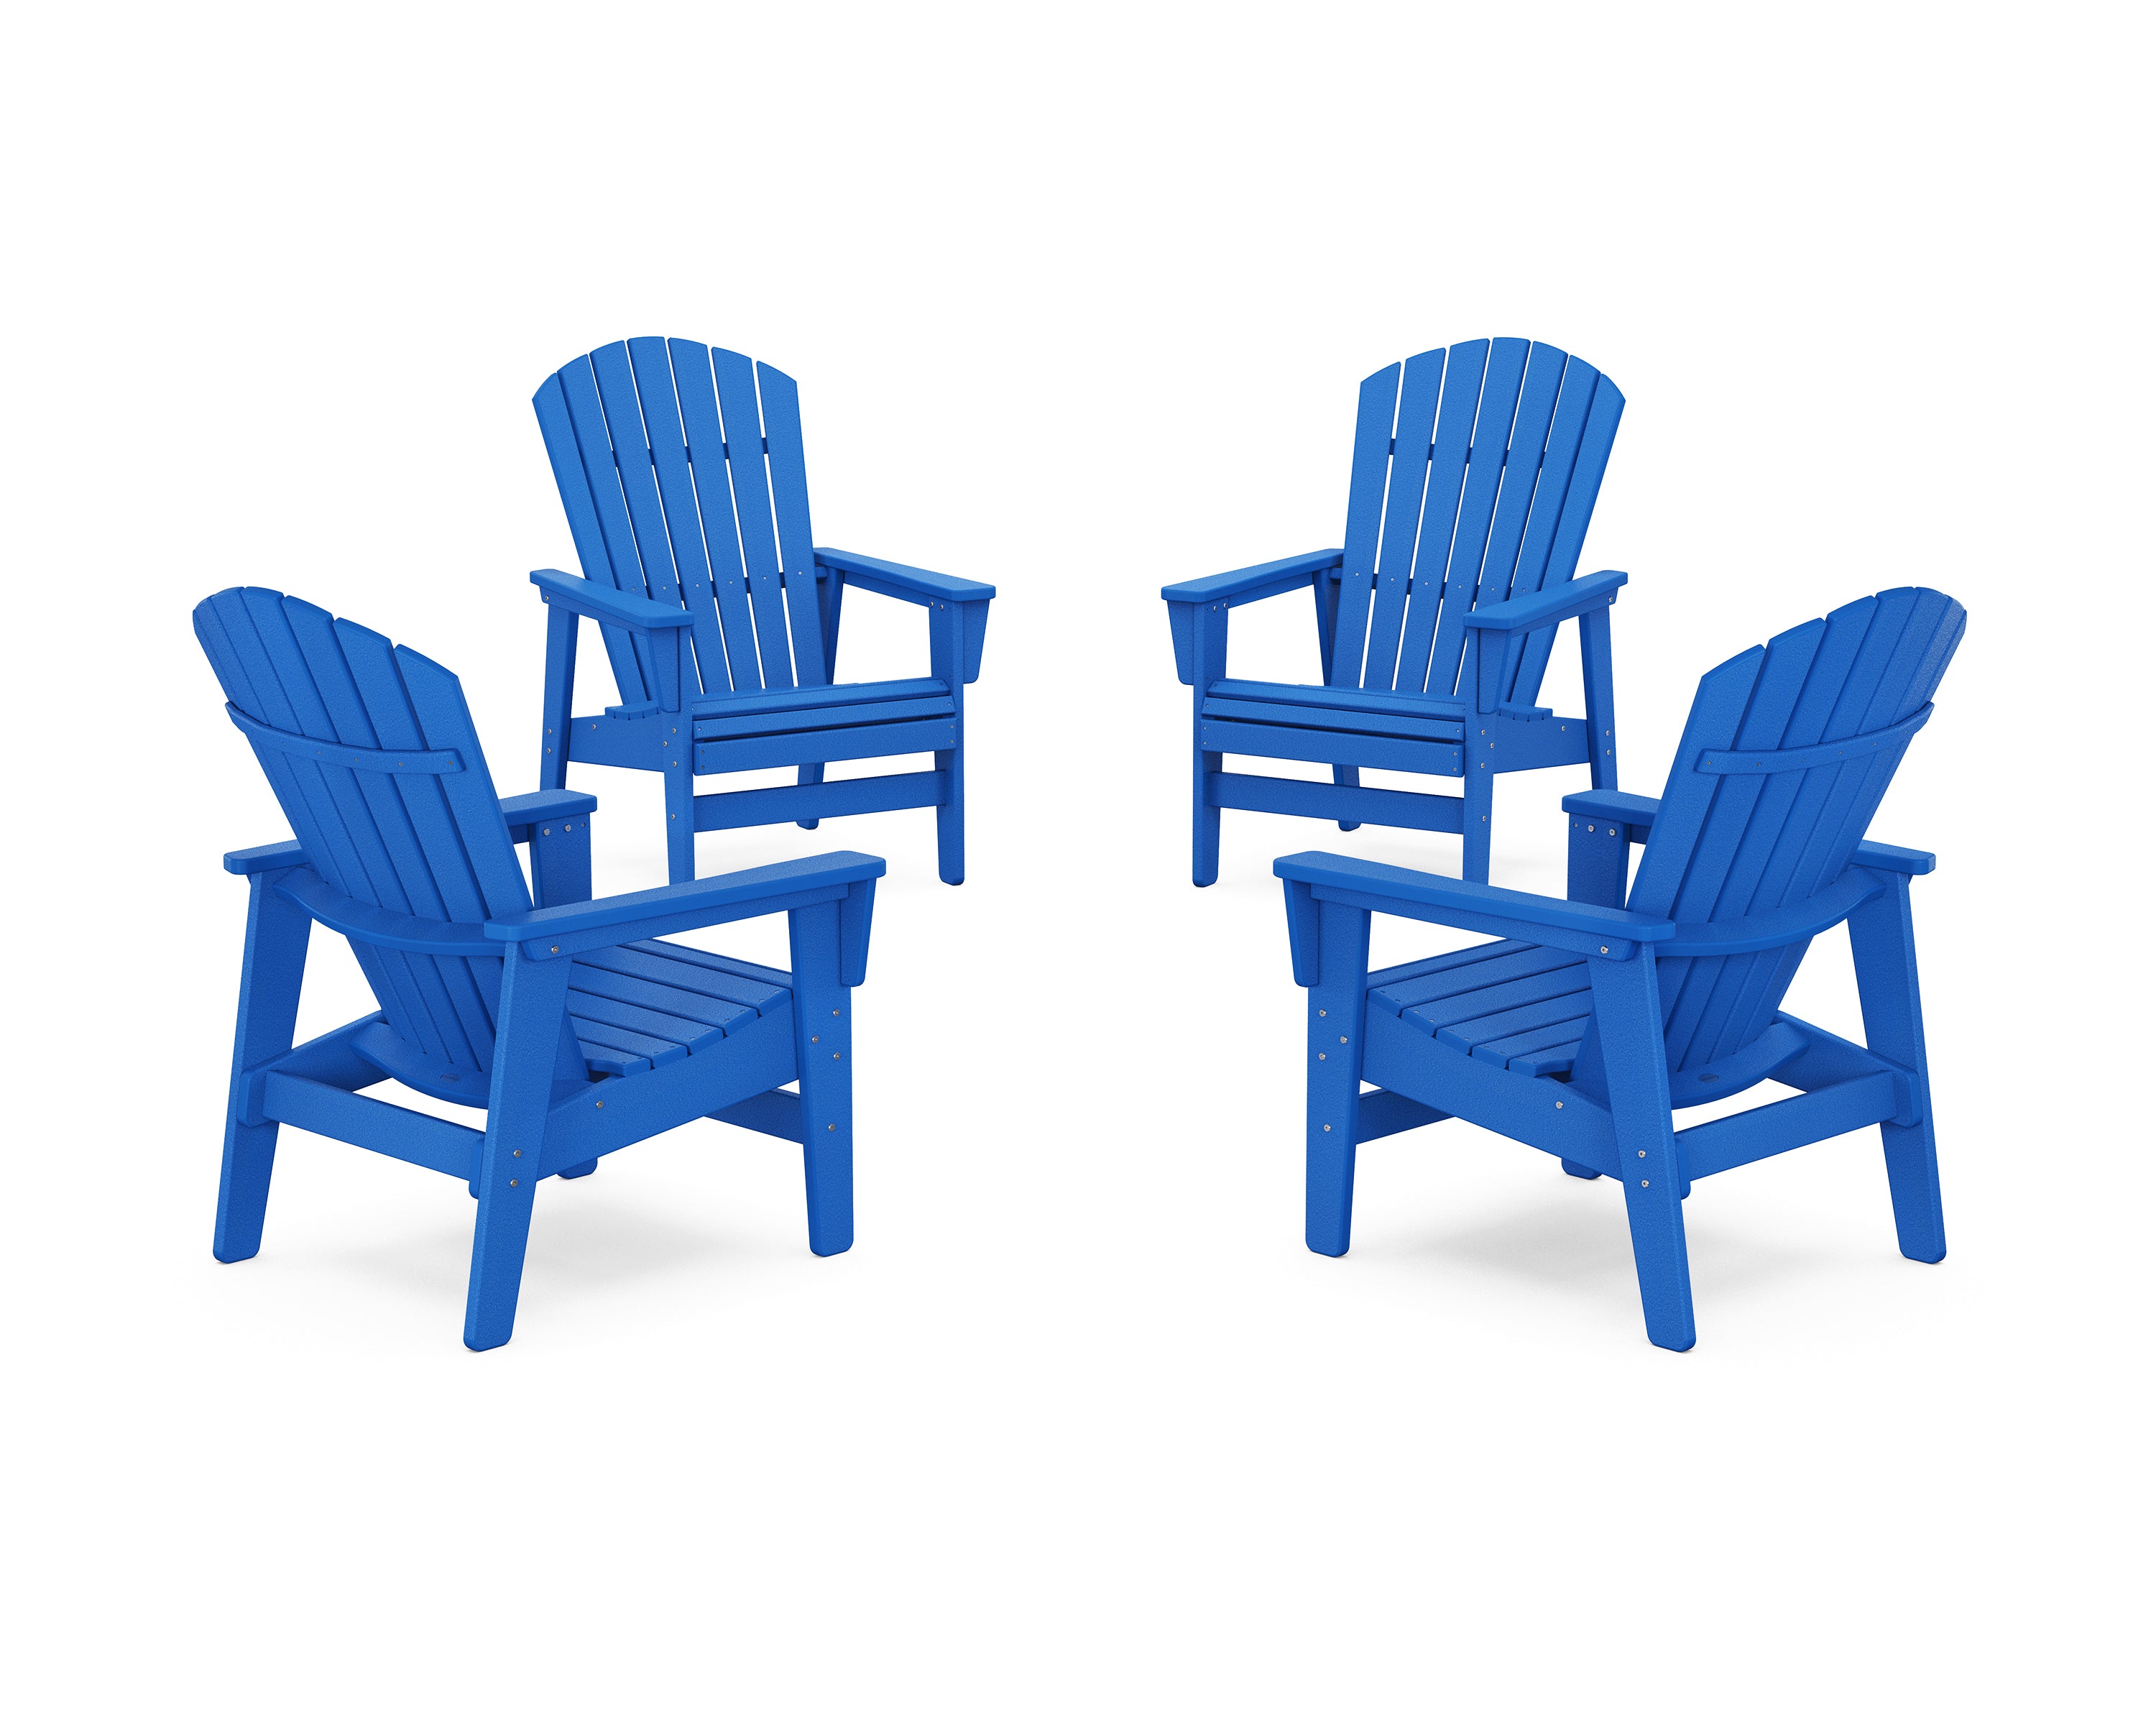 POLYWOOD® 4-Piece Nautical Grand Upright Adirondack Chair Conversation Set in Pacific Blue